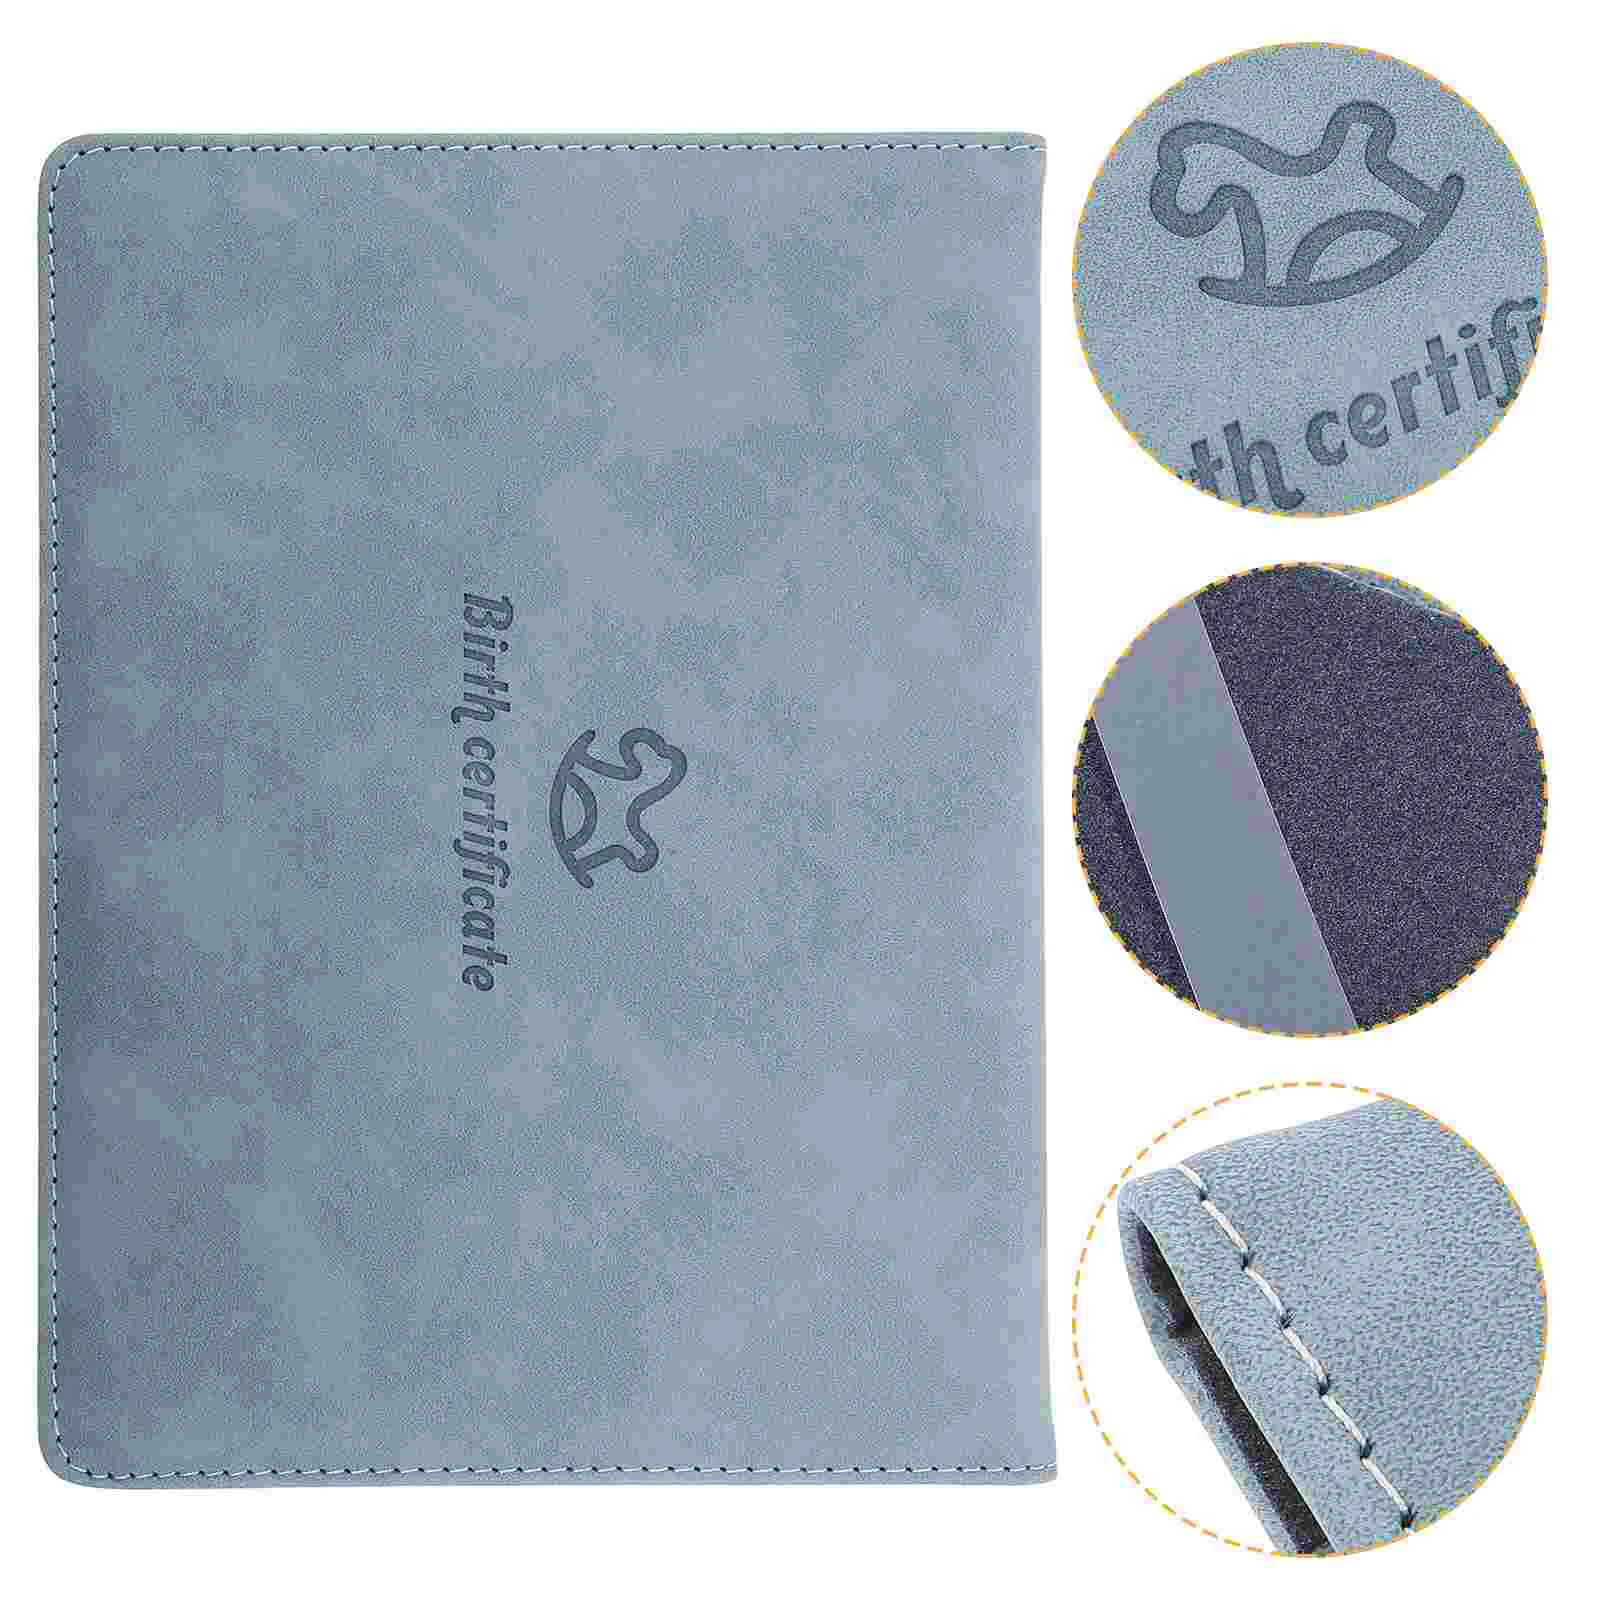 

Birth Certificate Cover Retro Protector Storage Case Holder for Baby Skin Protection Sleeve Protectors